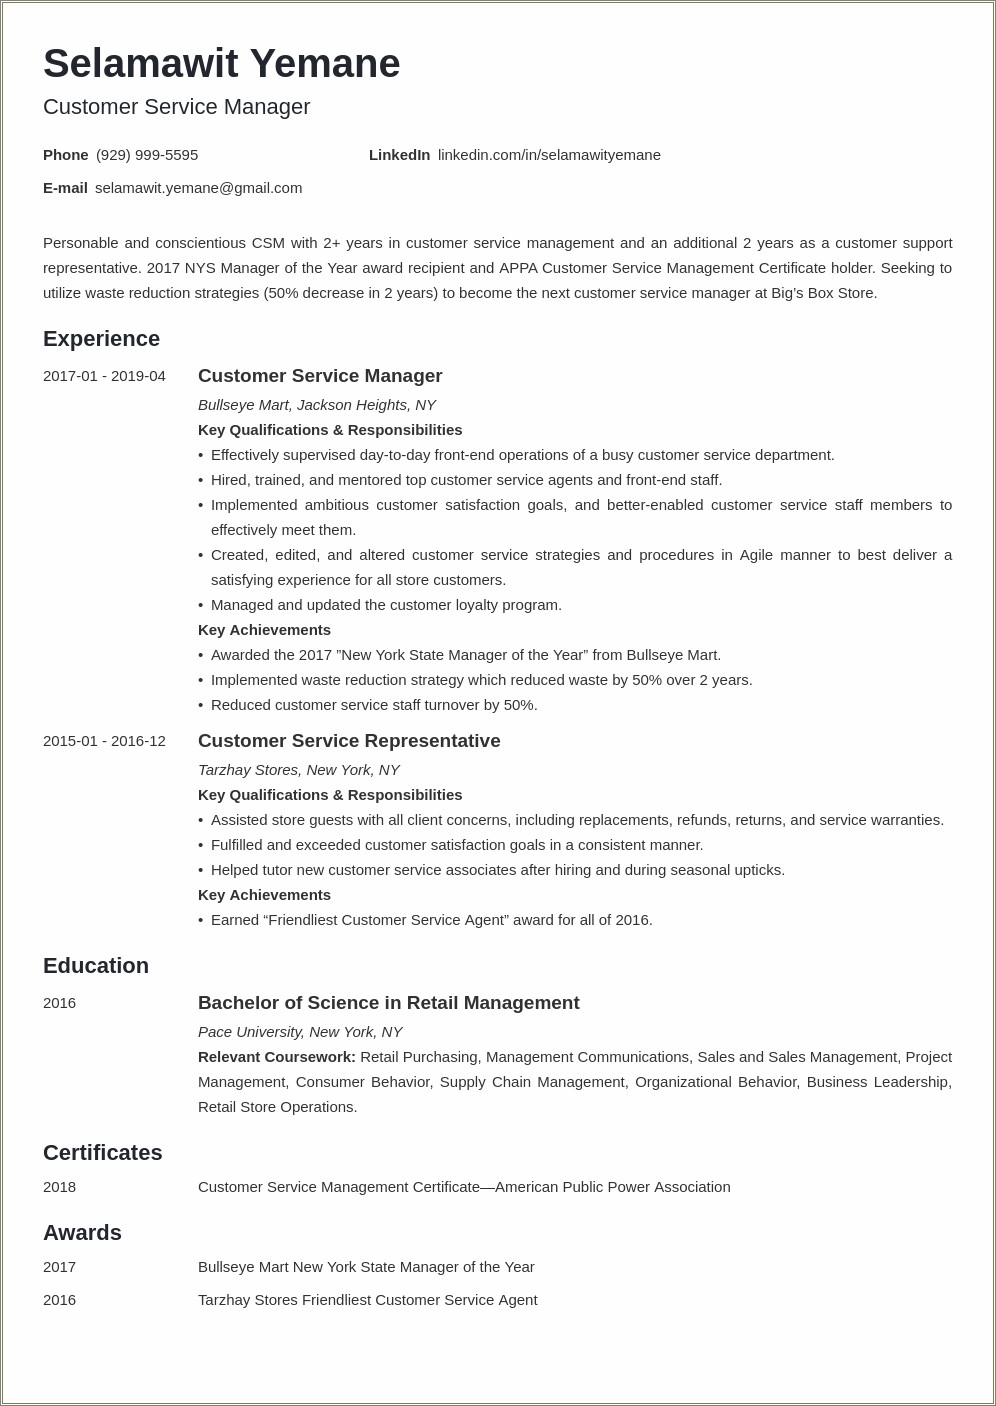 Resume Bullet Points For Call Center Manager